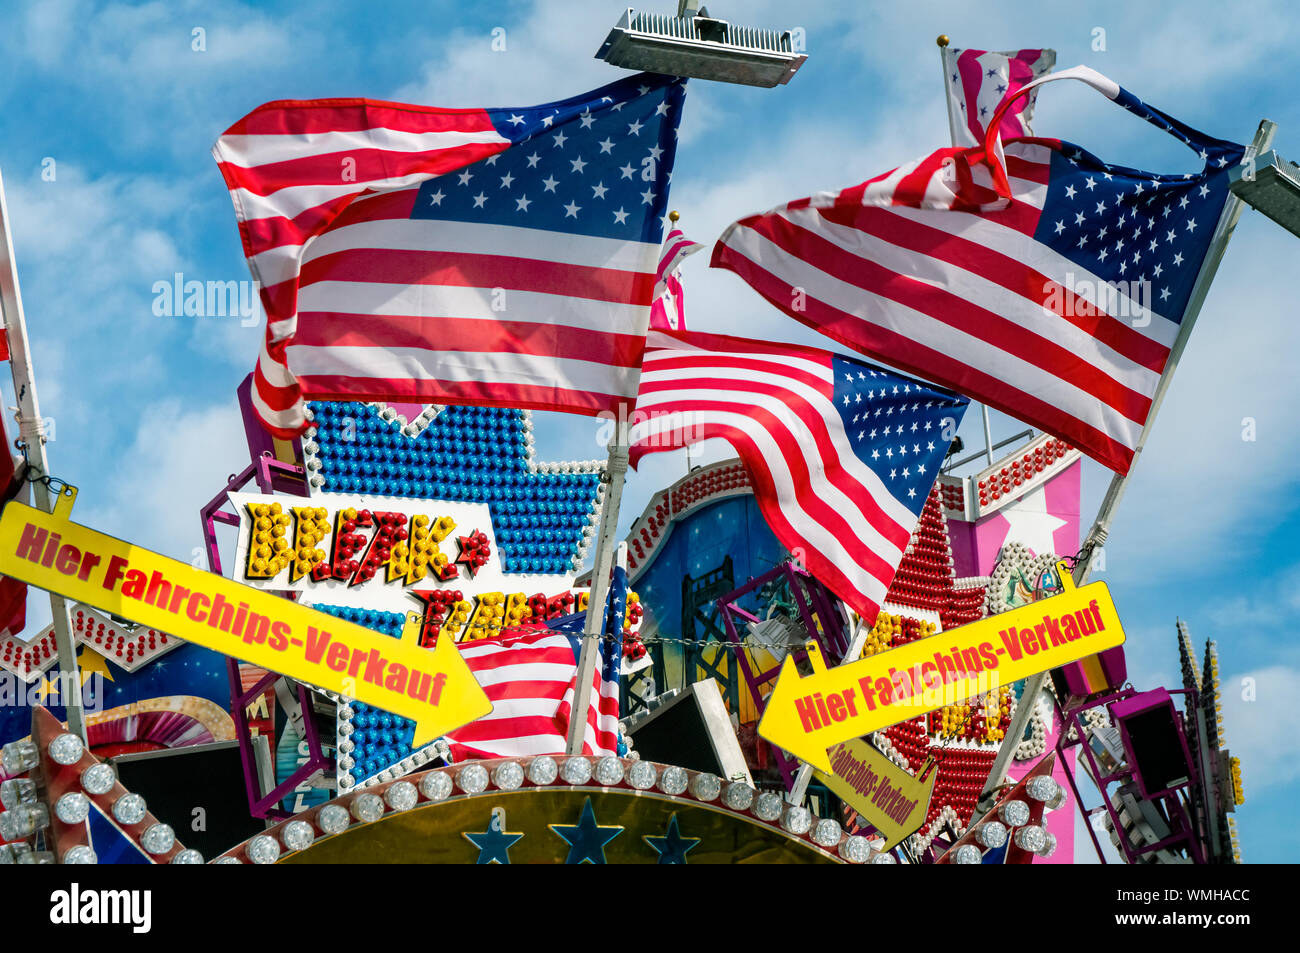 Flags of the USA at a ticket shop in front of an amusement ride on a fairground Stock Photo